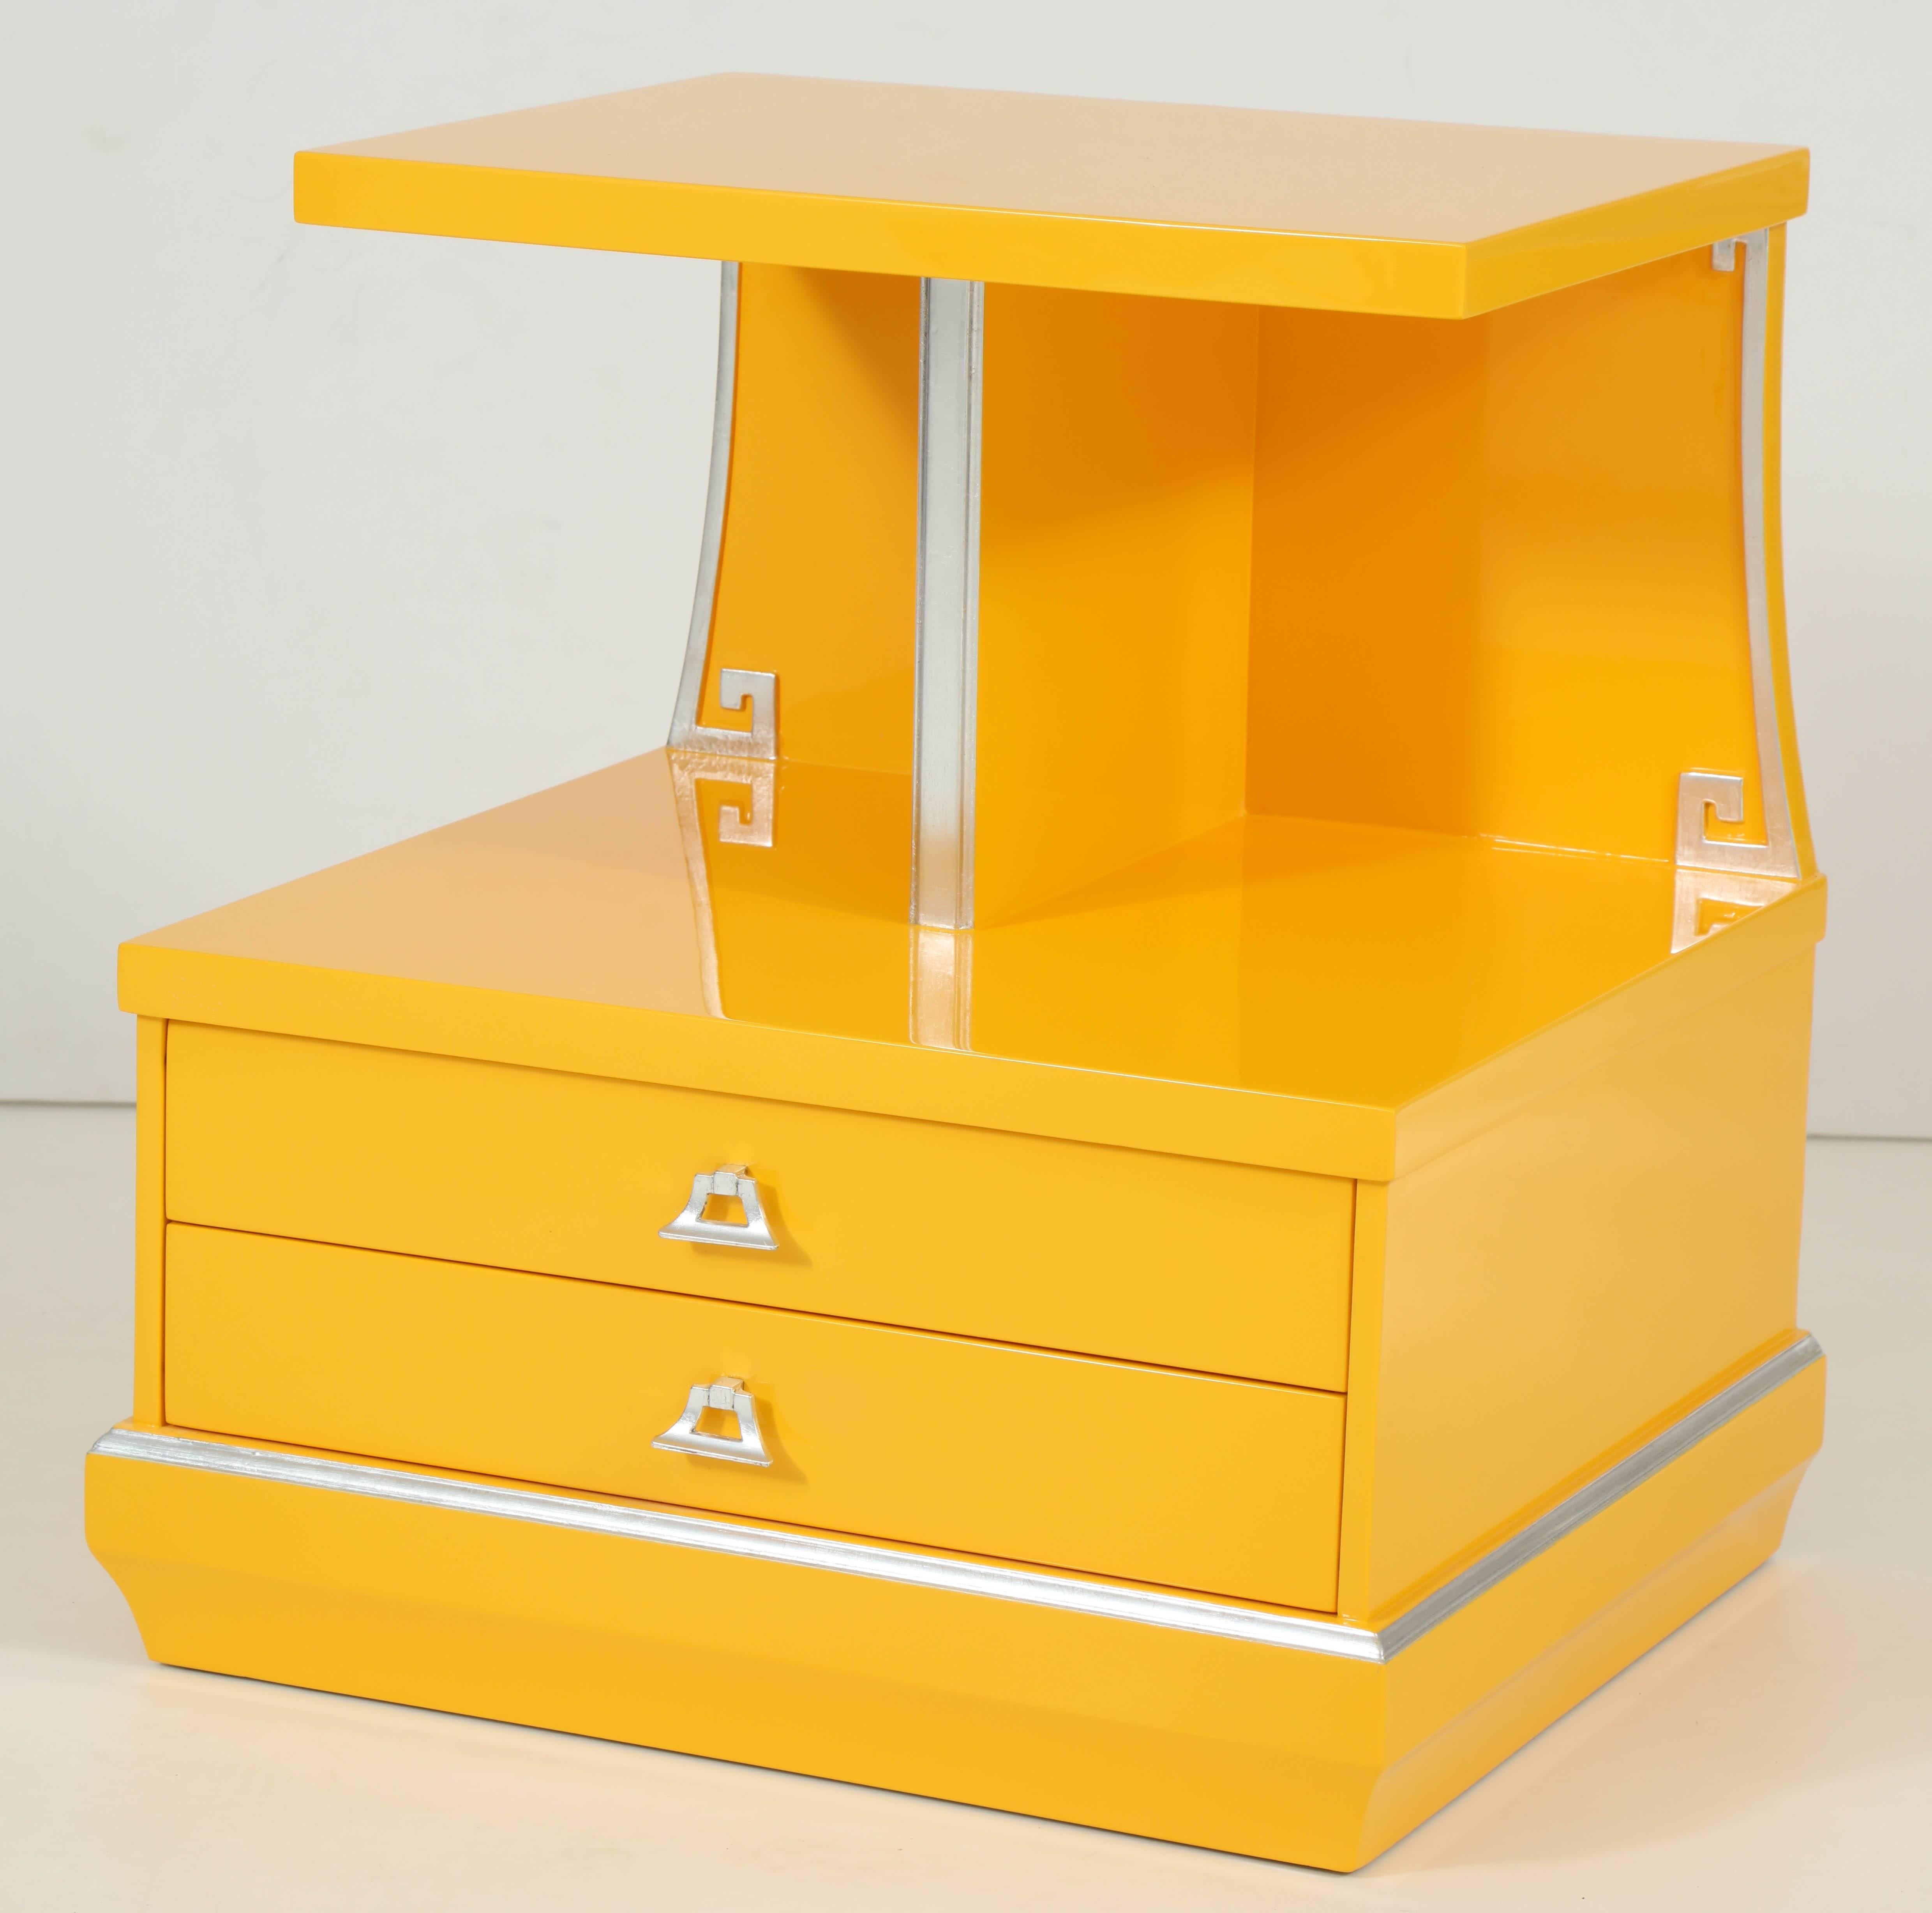 Pair of custom lacquered Art Deco nightstands in a vibrant canary yellow with silver leaf Greek key details and border. Nightstands feature two drawers. Perfect for the Chinoiserie/Tony Duquette setting.